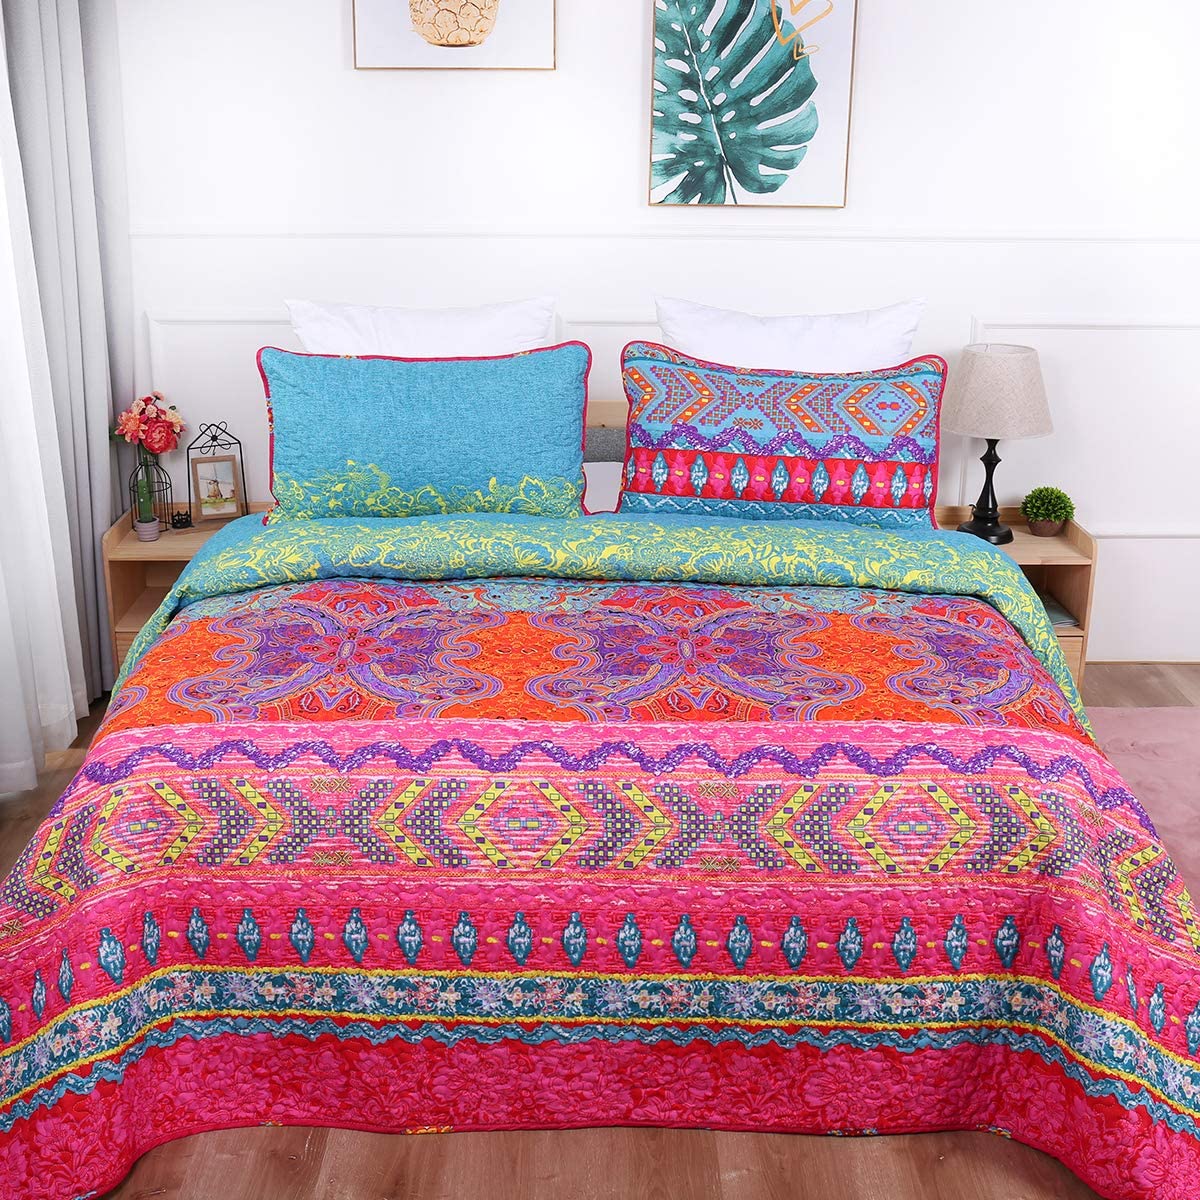 Bohemian Quilt Set Queen, 3 Pieces Boho Chic Pattern Printed Bedding